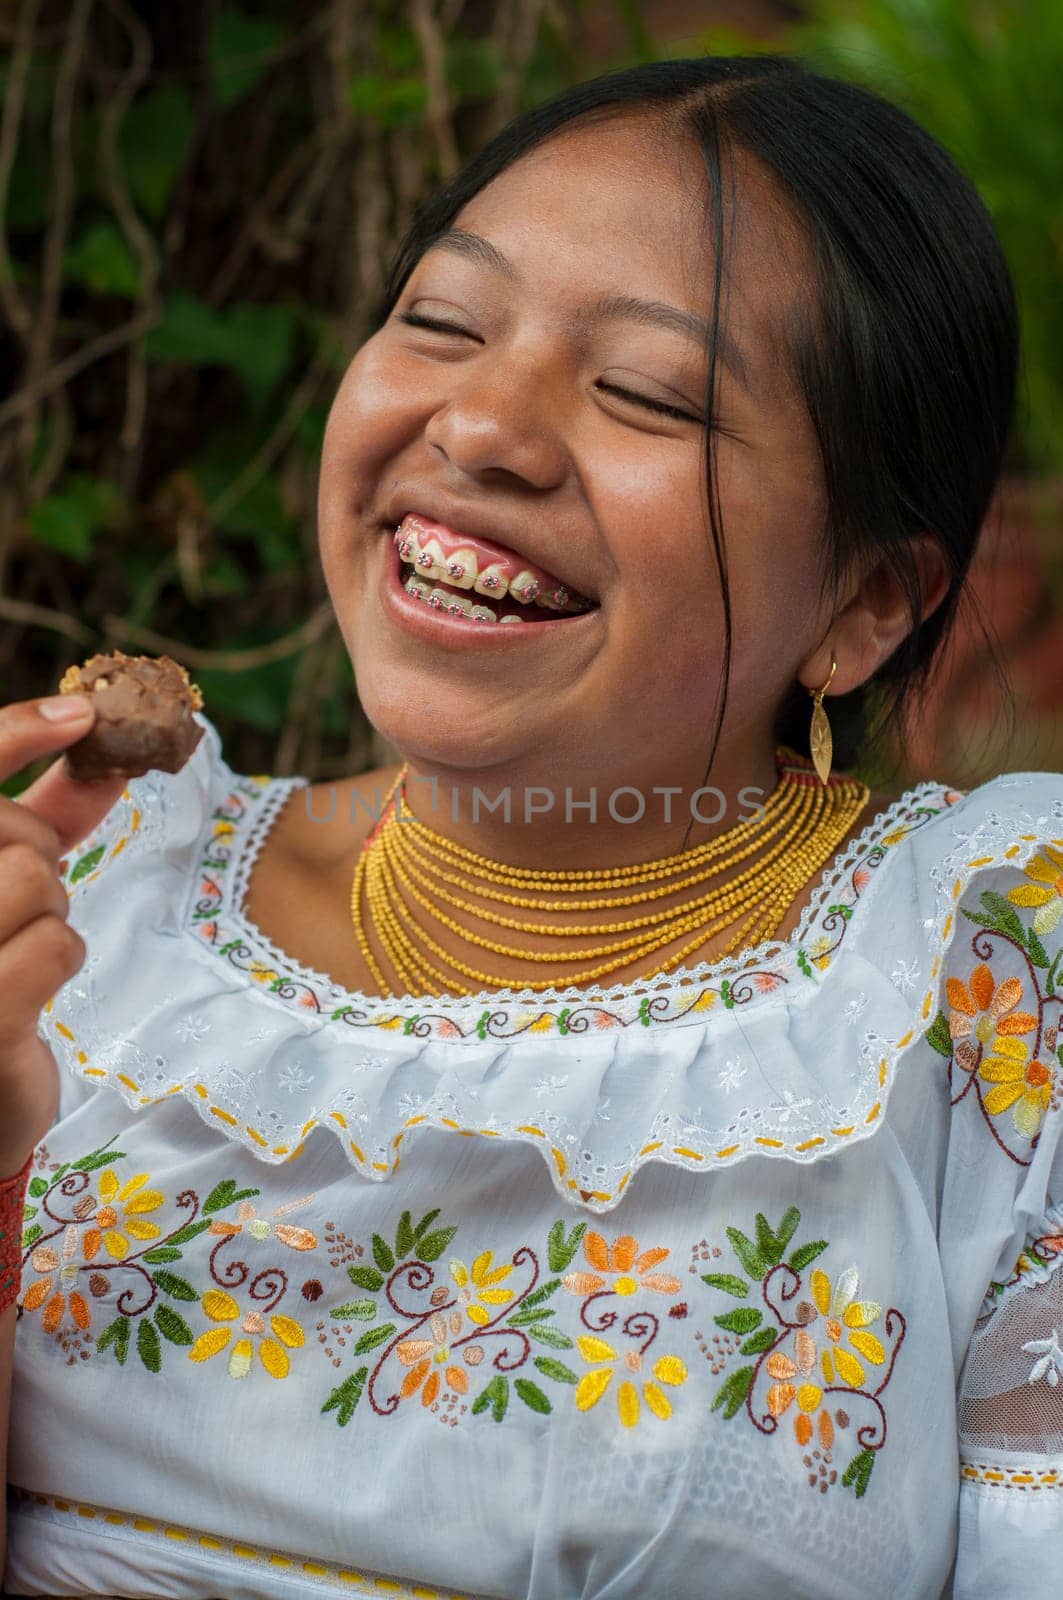 A cheerful young Indian girl with braces is captured in a moment of pure happiness as she enjoys a sweet treat outdoors, dressed in traditional embroidered clothing. by Raulmartin